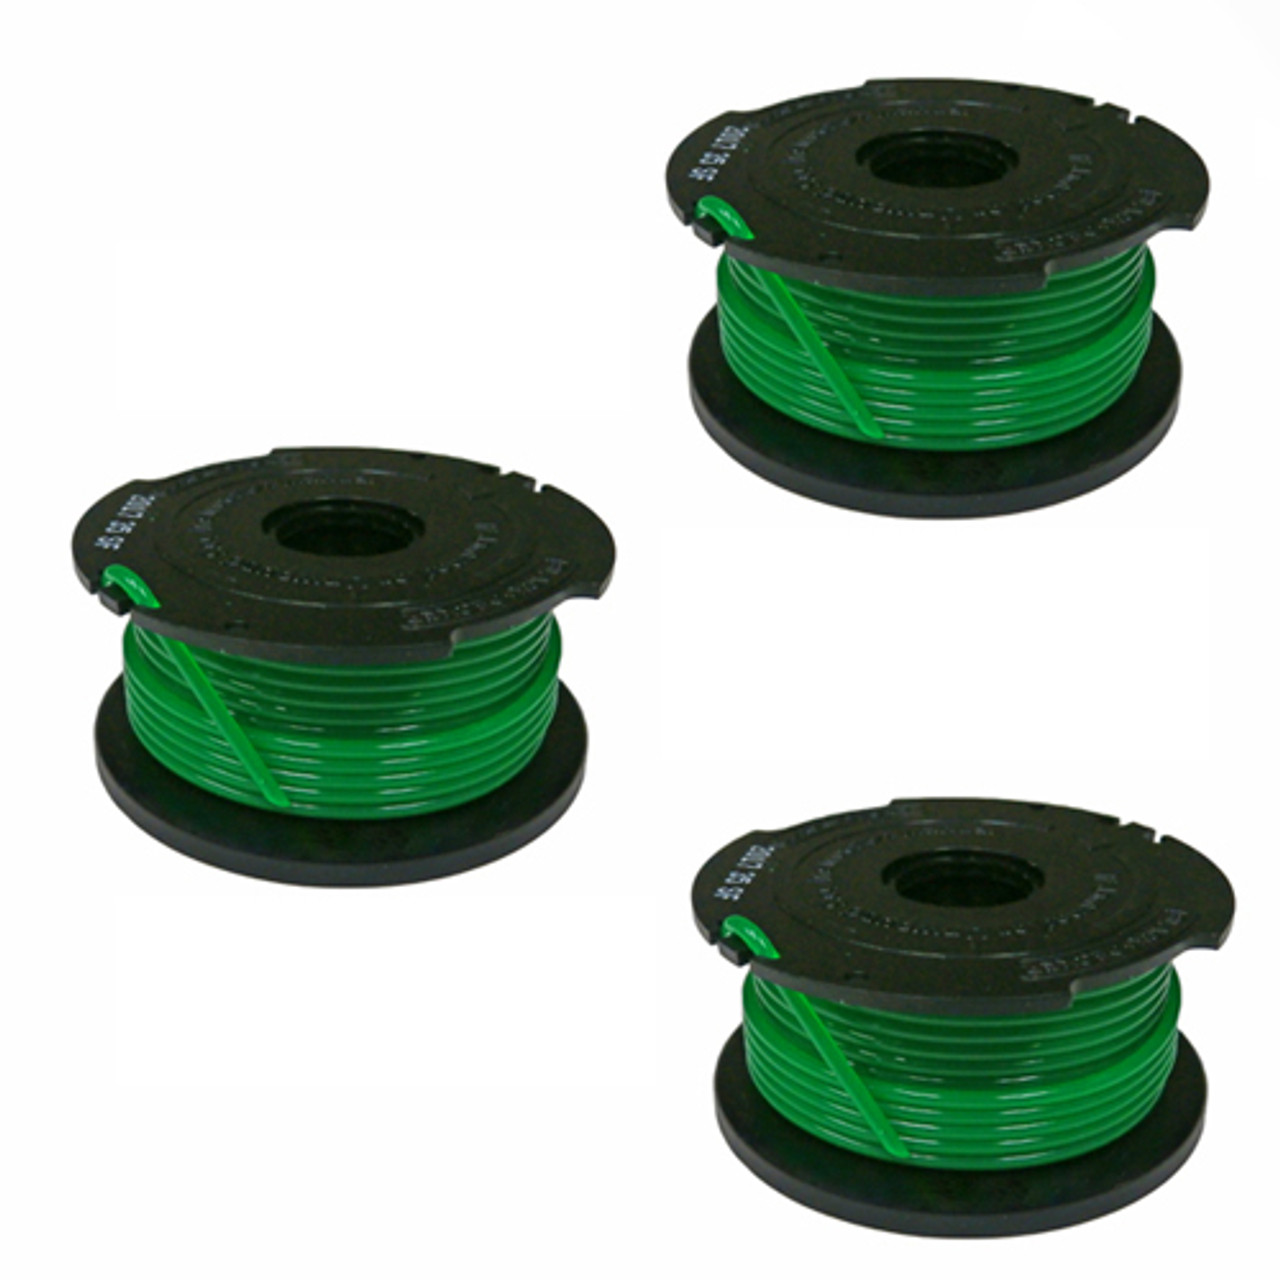 For Black & Decker GH3000, SF-080 Grass Trimmer Replacement Spool